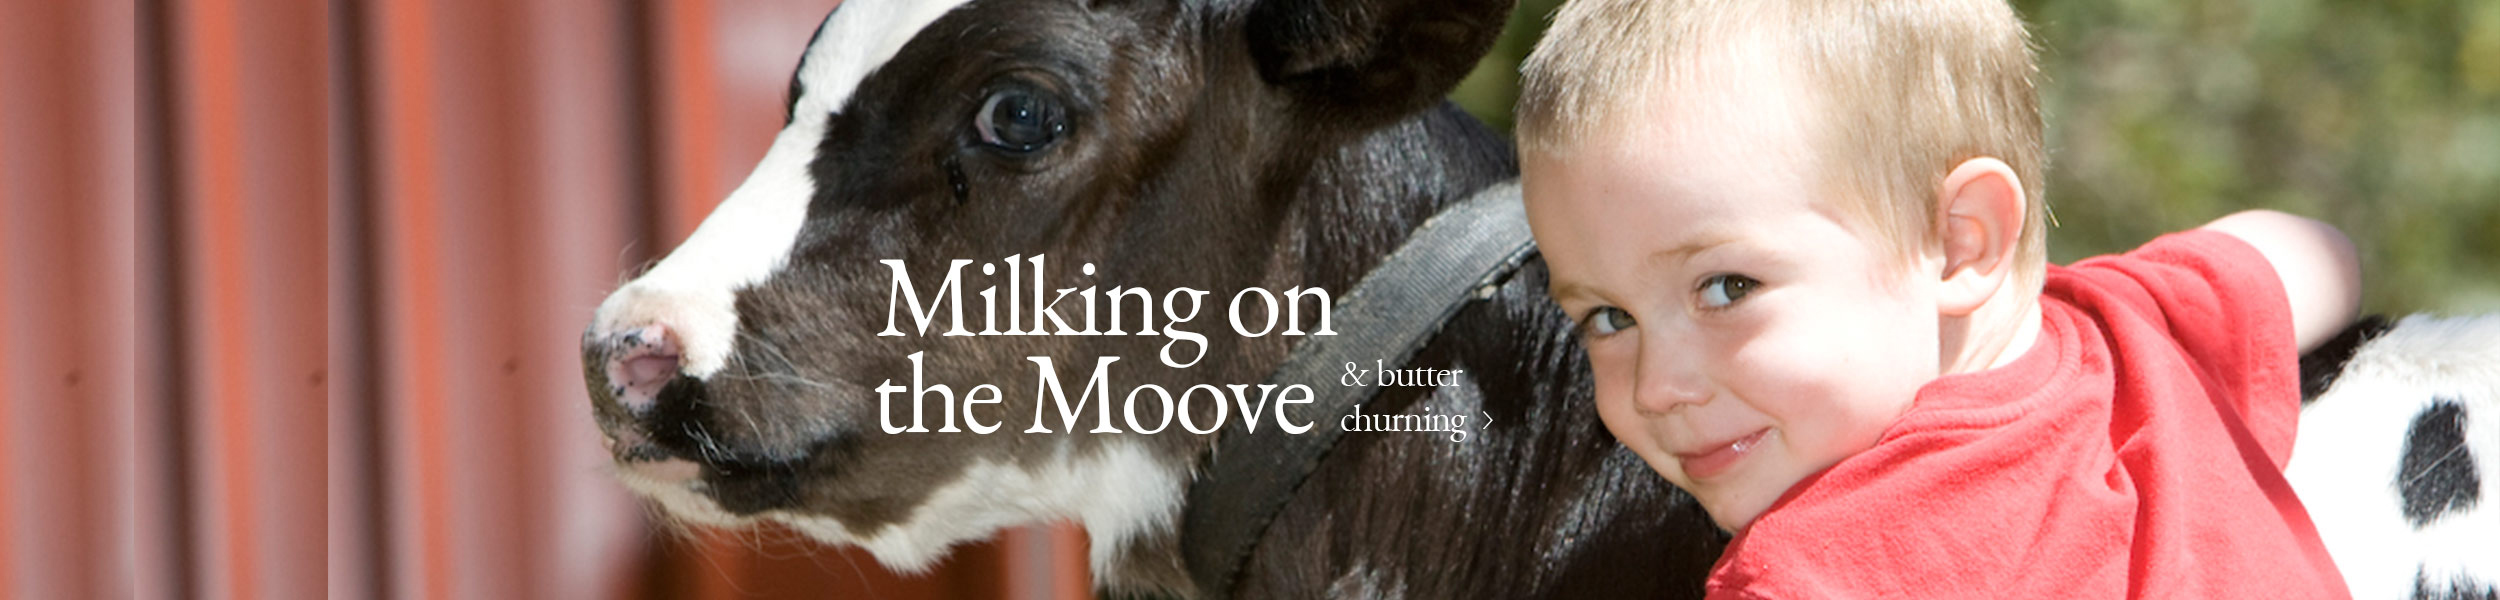 HP-milking_on_the_move-1